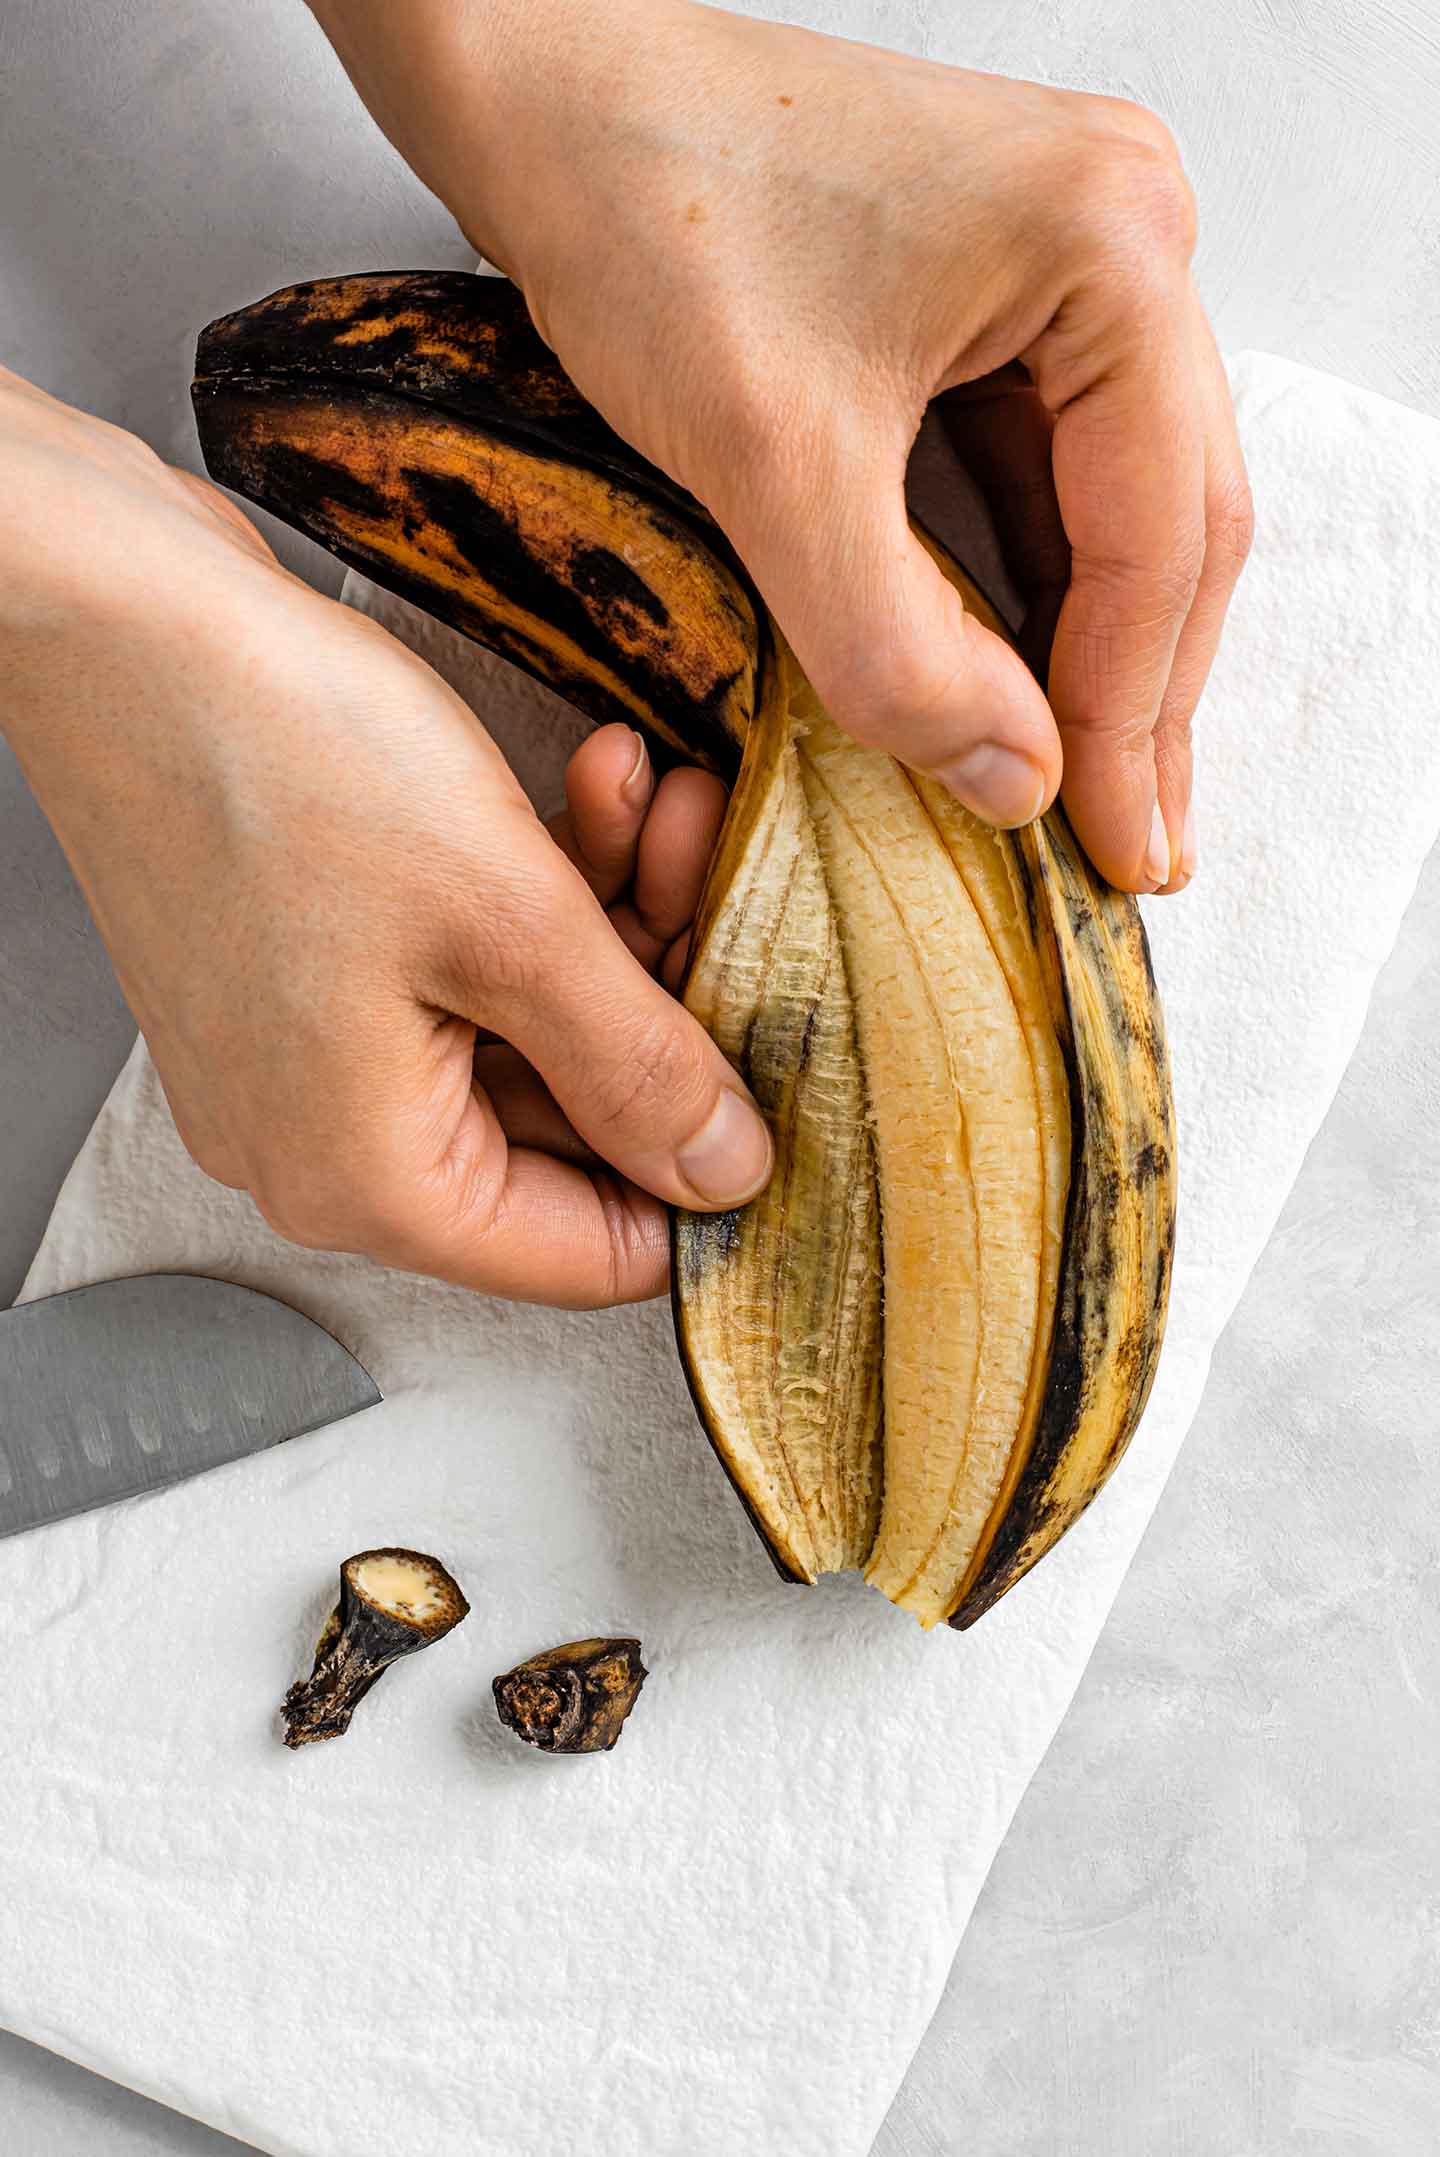 Top down view of two hands pulling the peel back from a plantain. The peel has been sliced down the length of the fruit and the two ends lay sliced off on a tray.